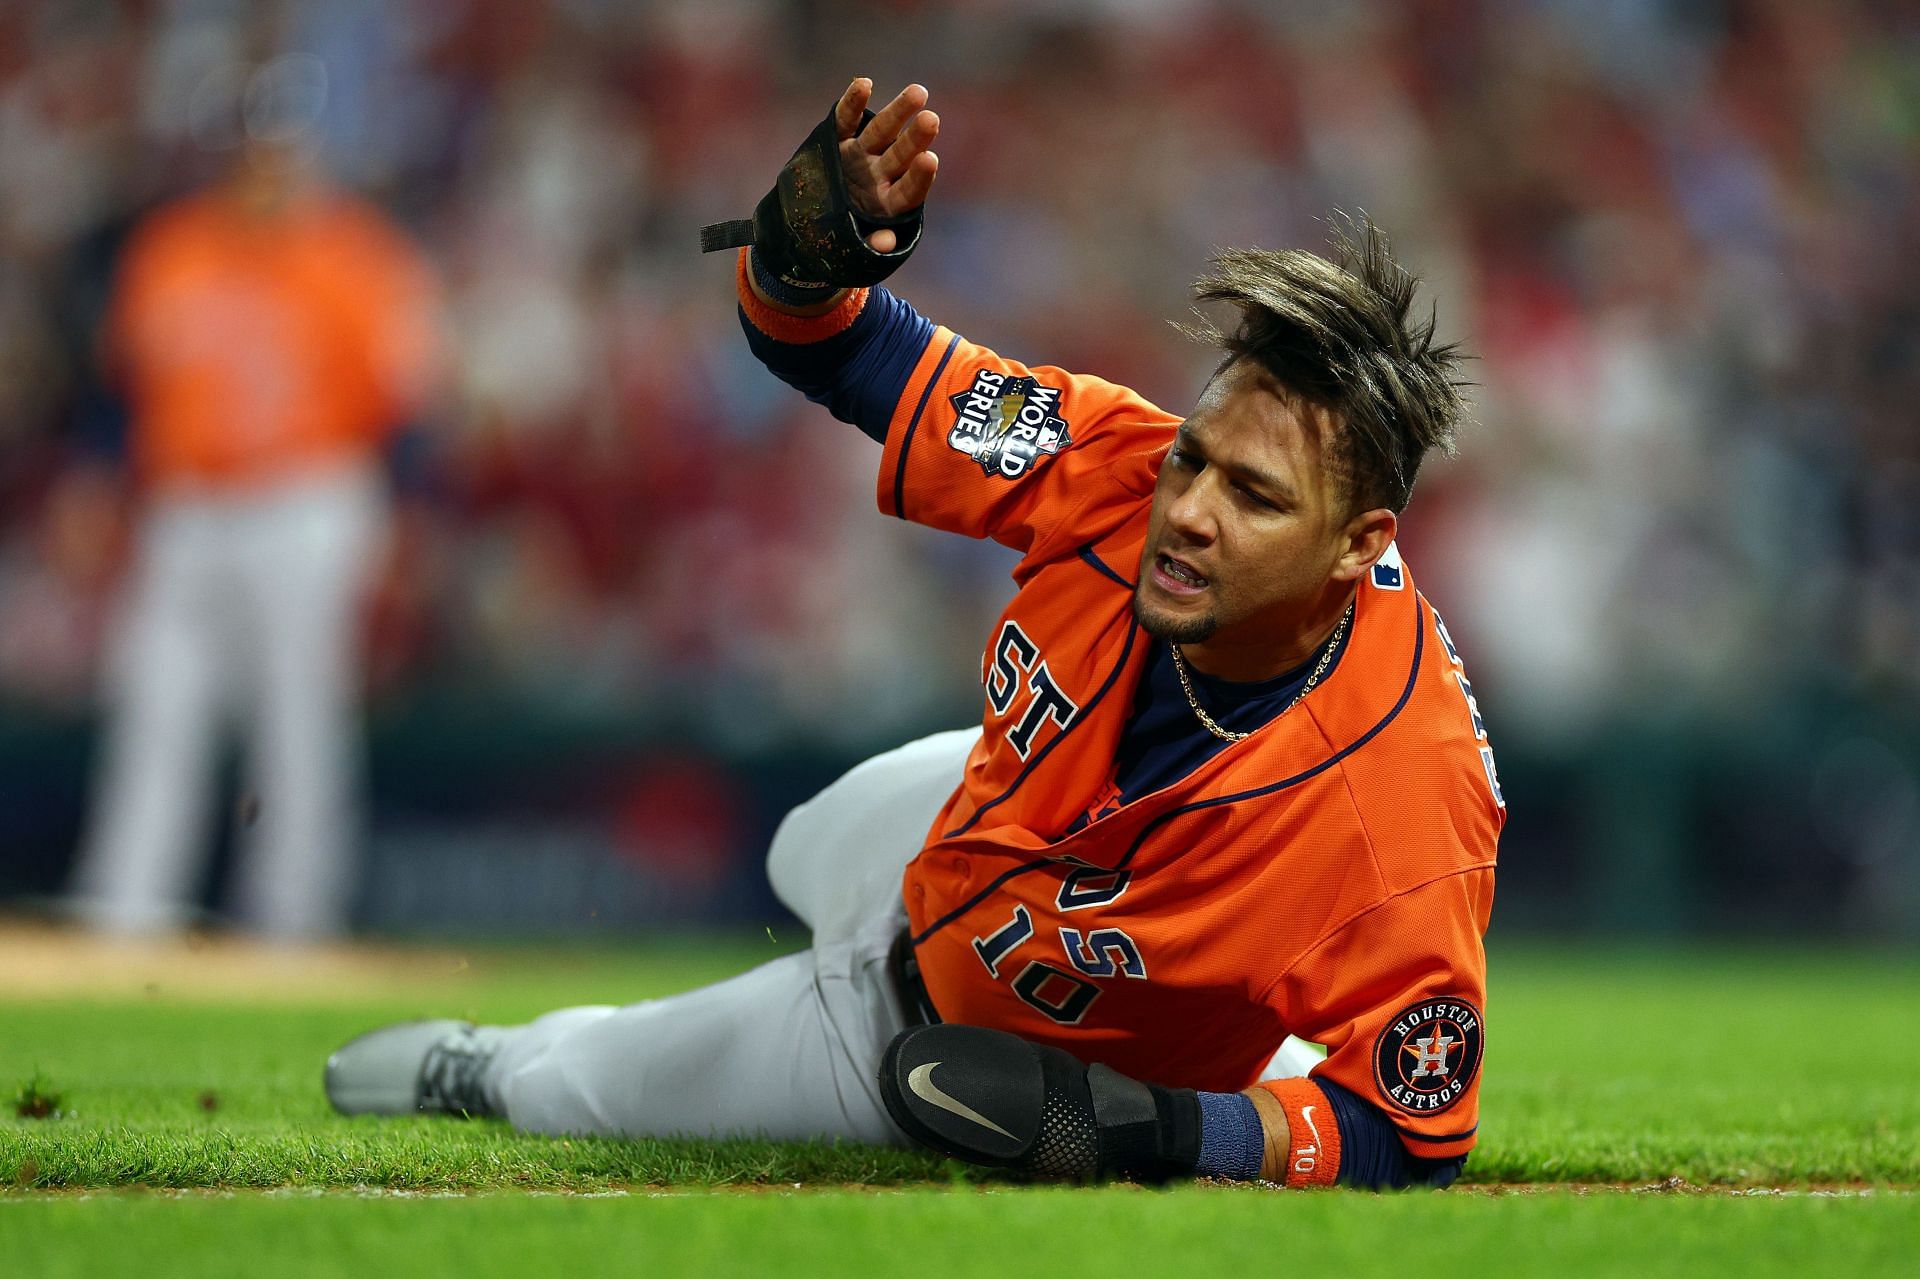 Yuli Gurriel is still being courted by Miami Marlins, reports MLB Insider